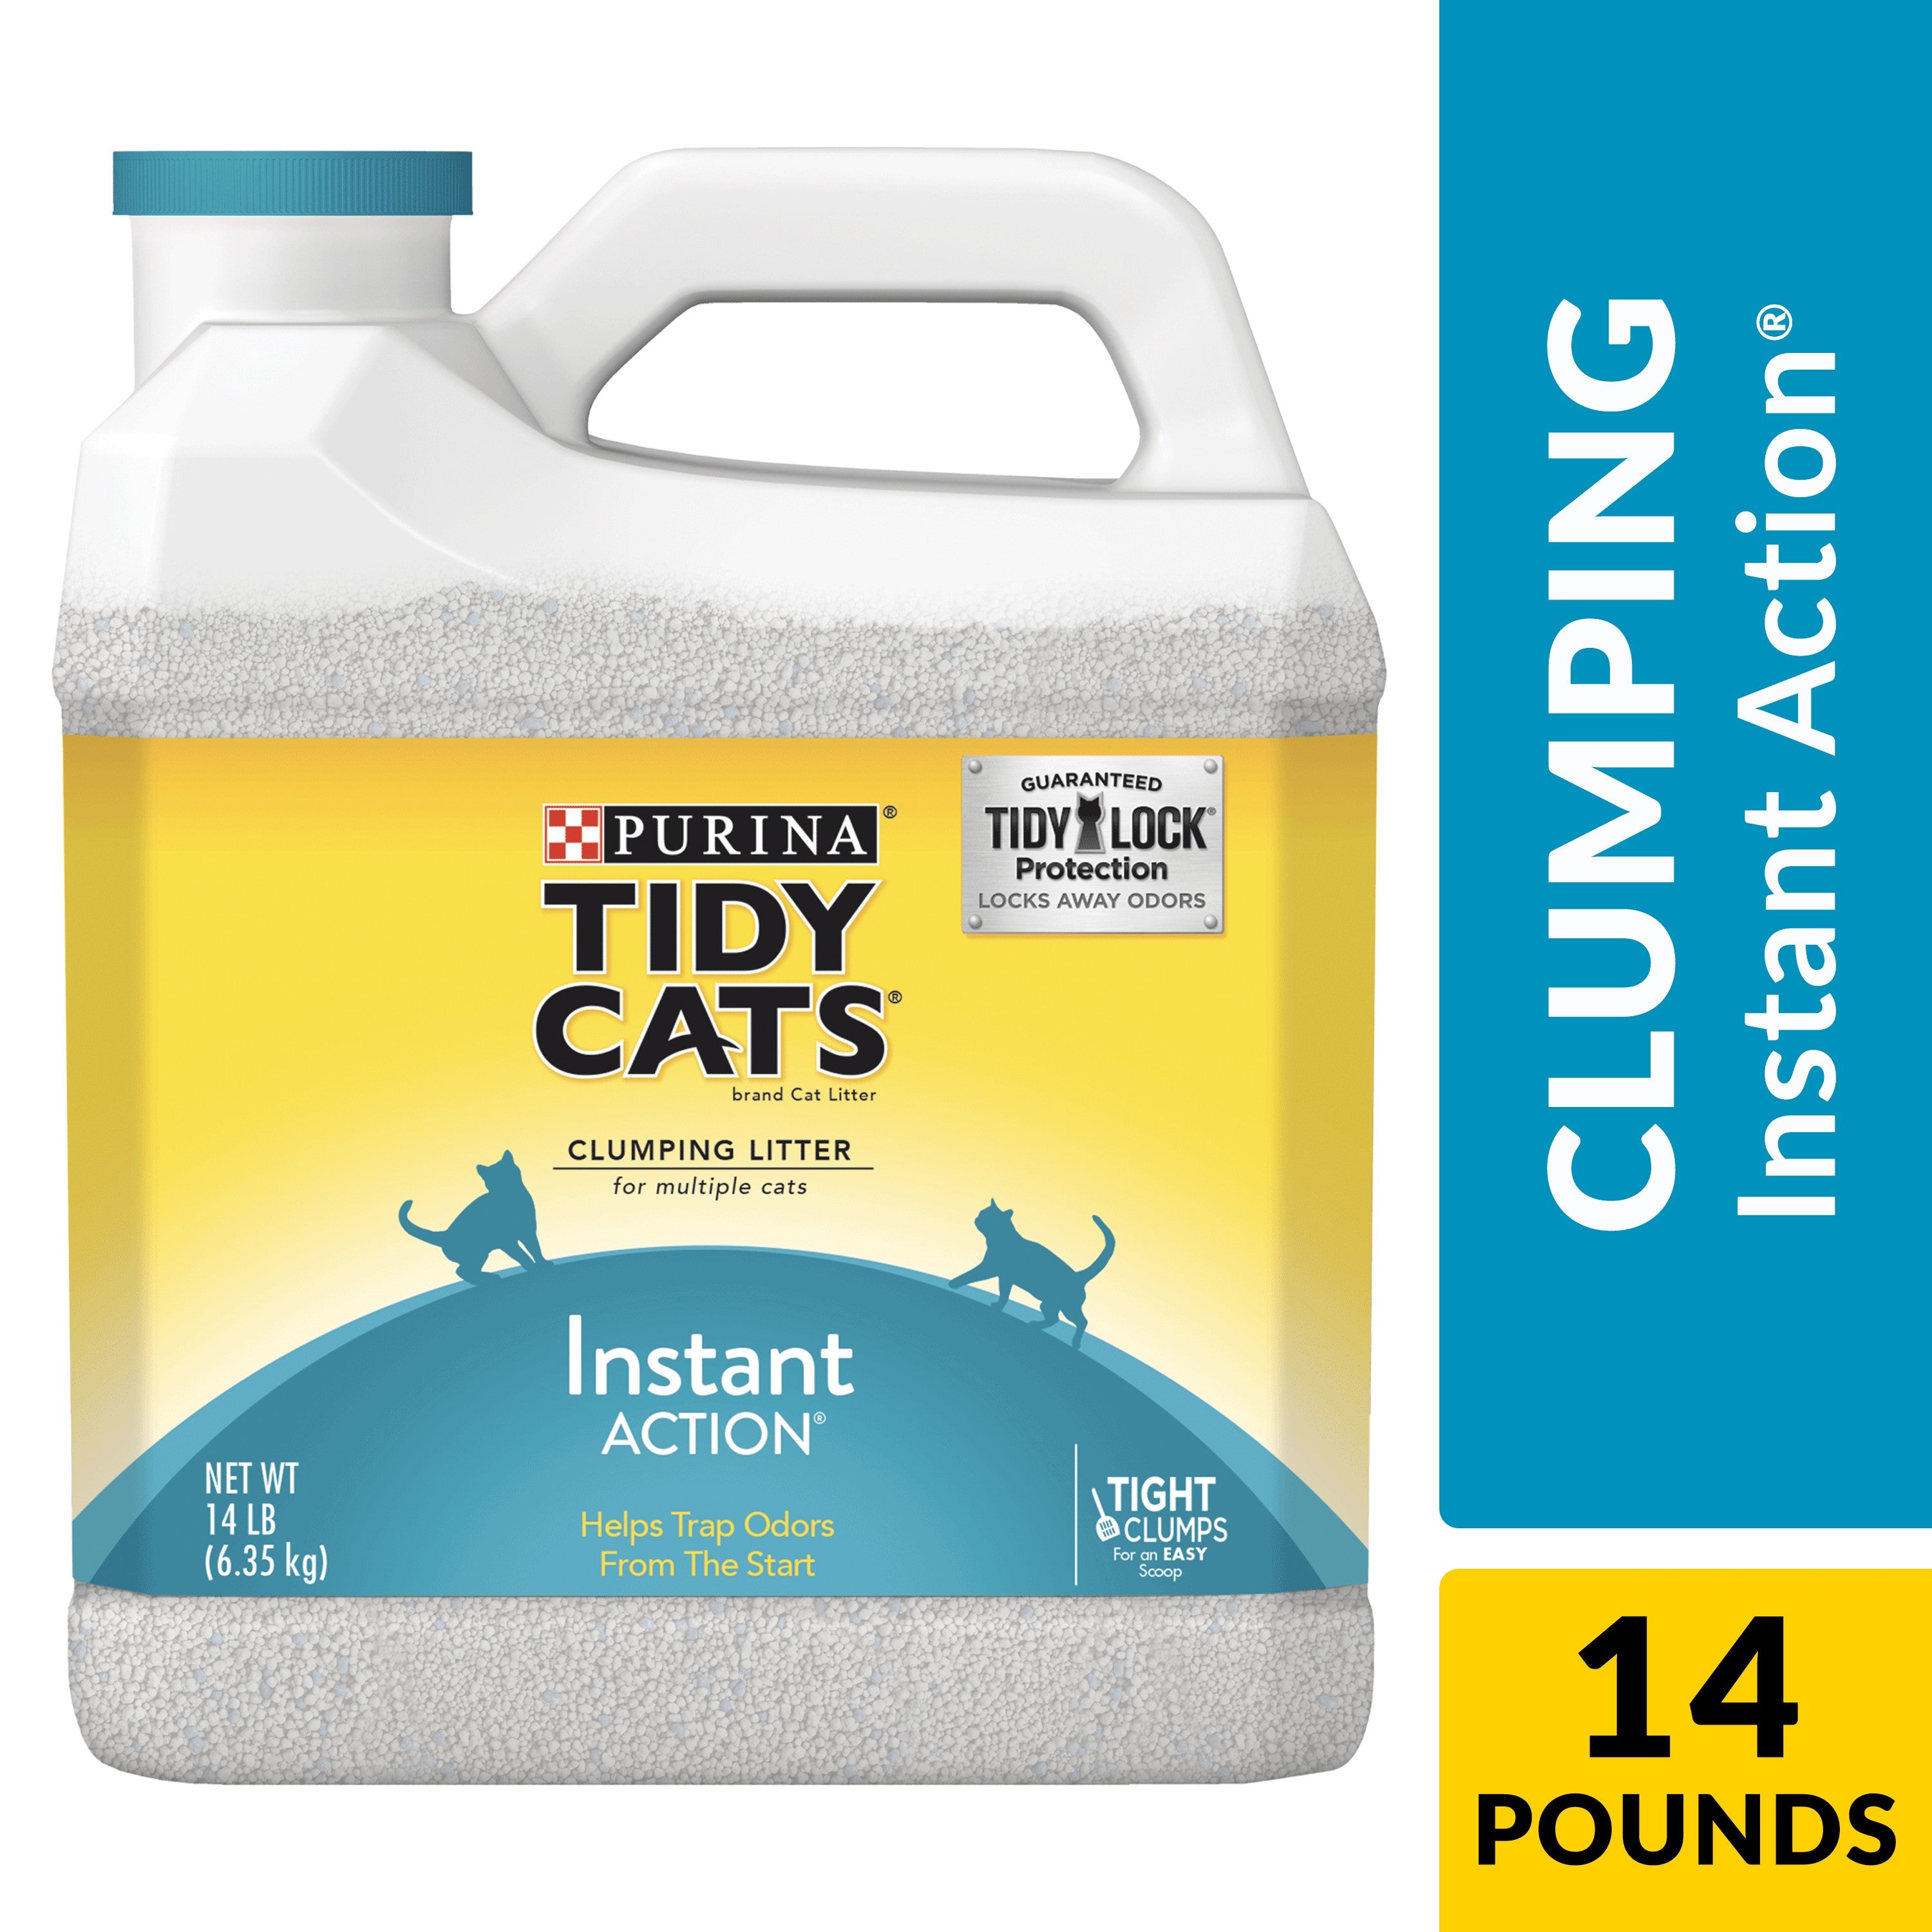 Tidy Cats Instant Action Litter 6.35kg